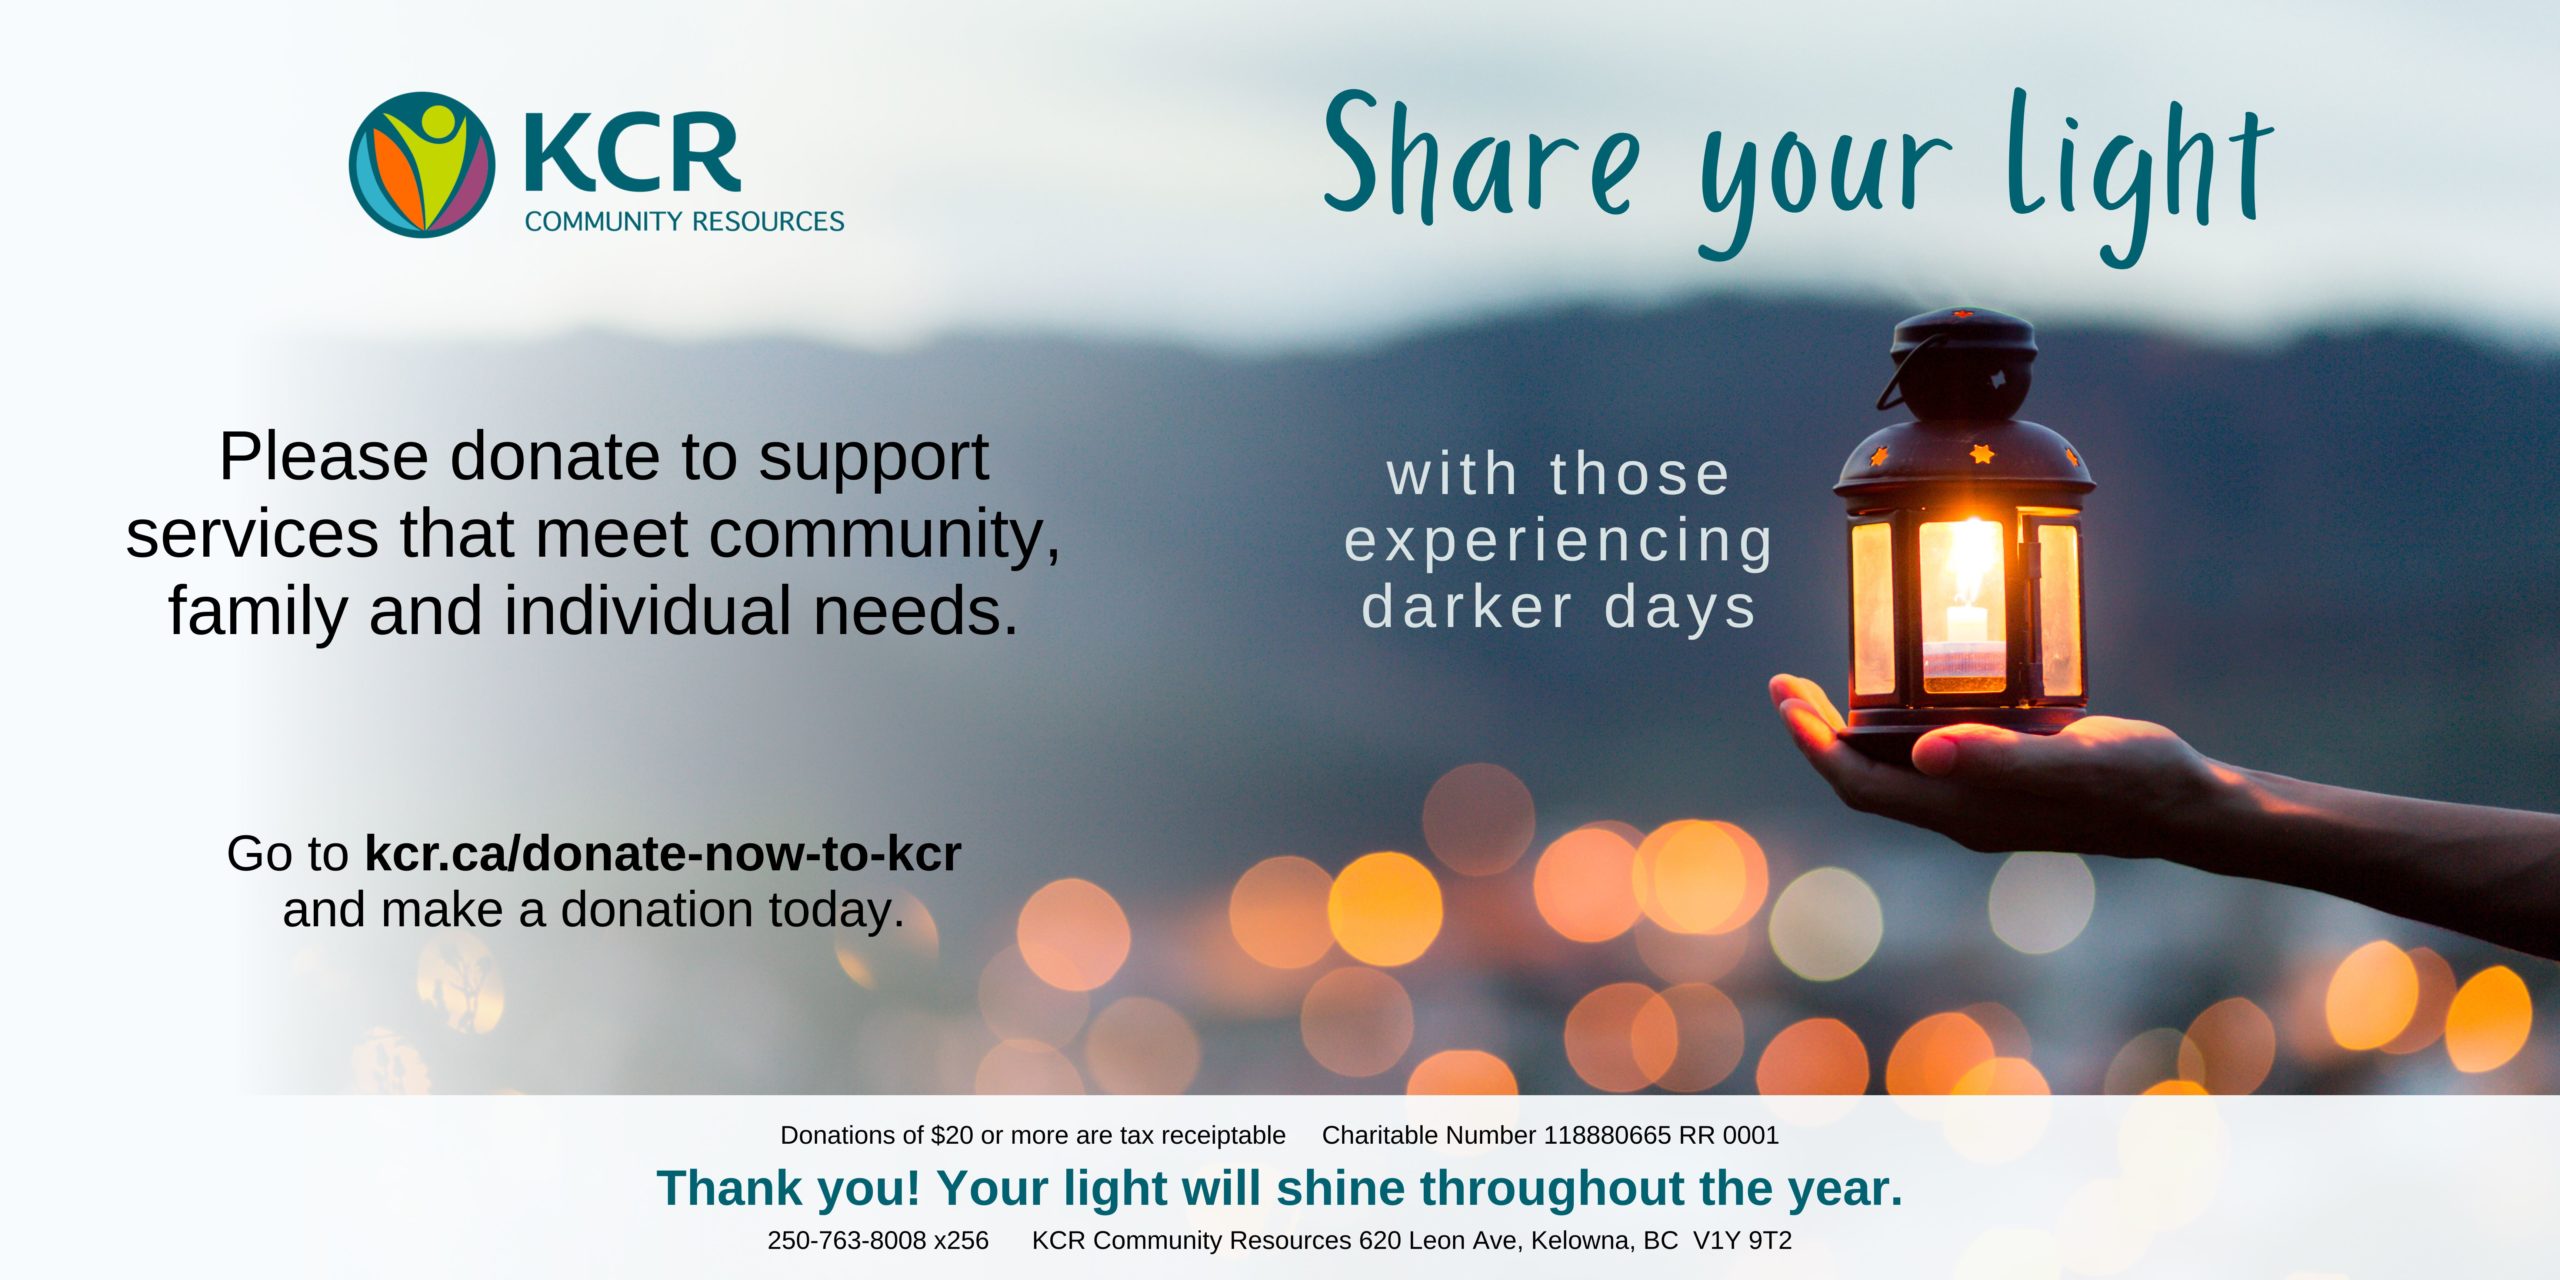 Share your Light